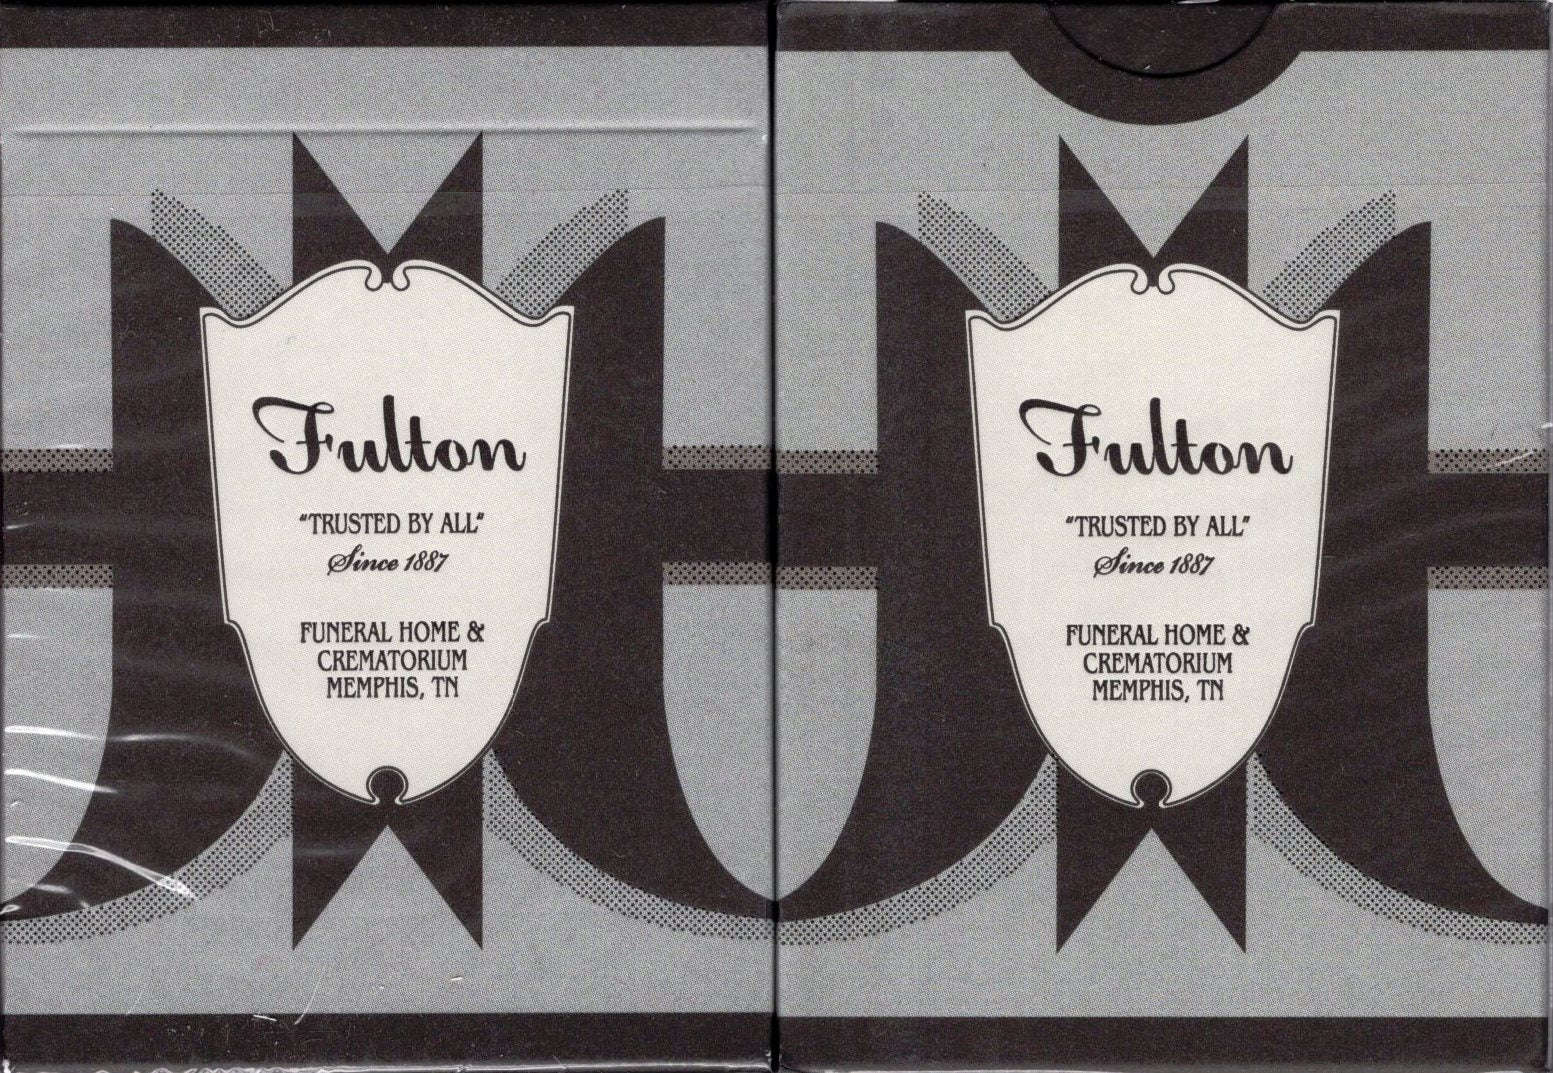 Fulton S Funeral Home Playing Cards Uspcc